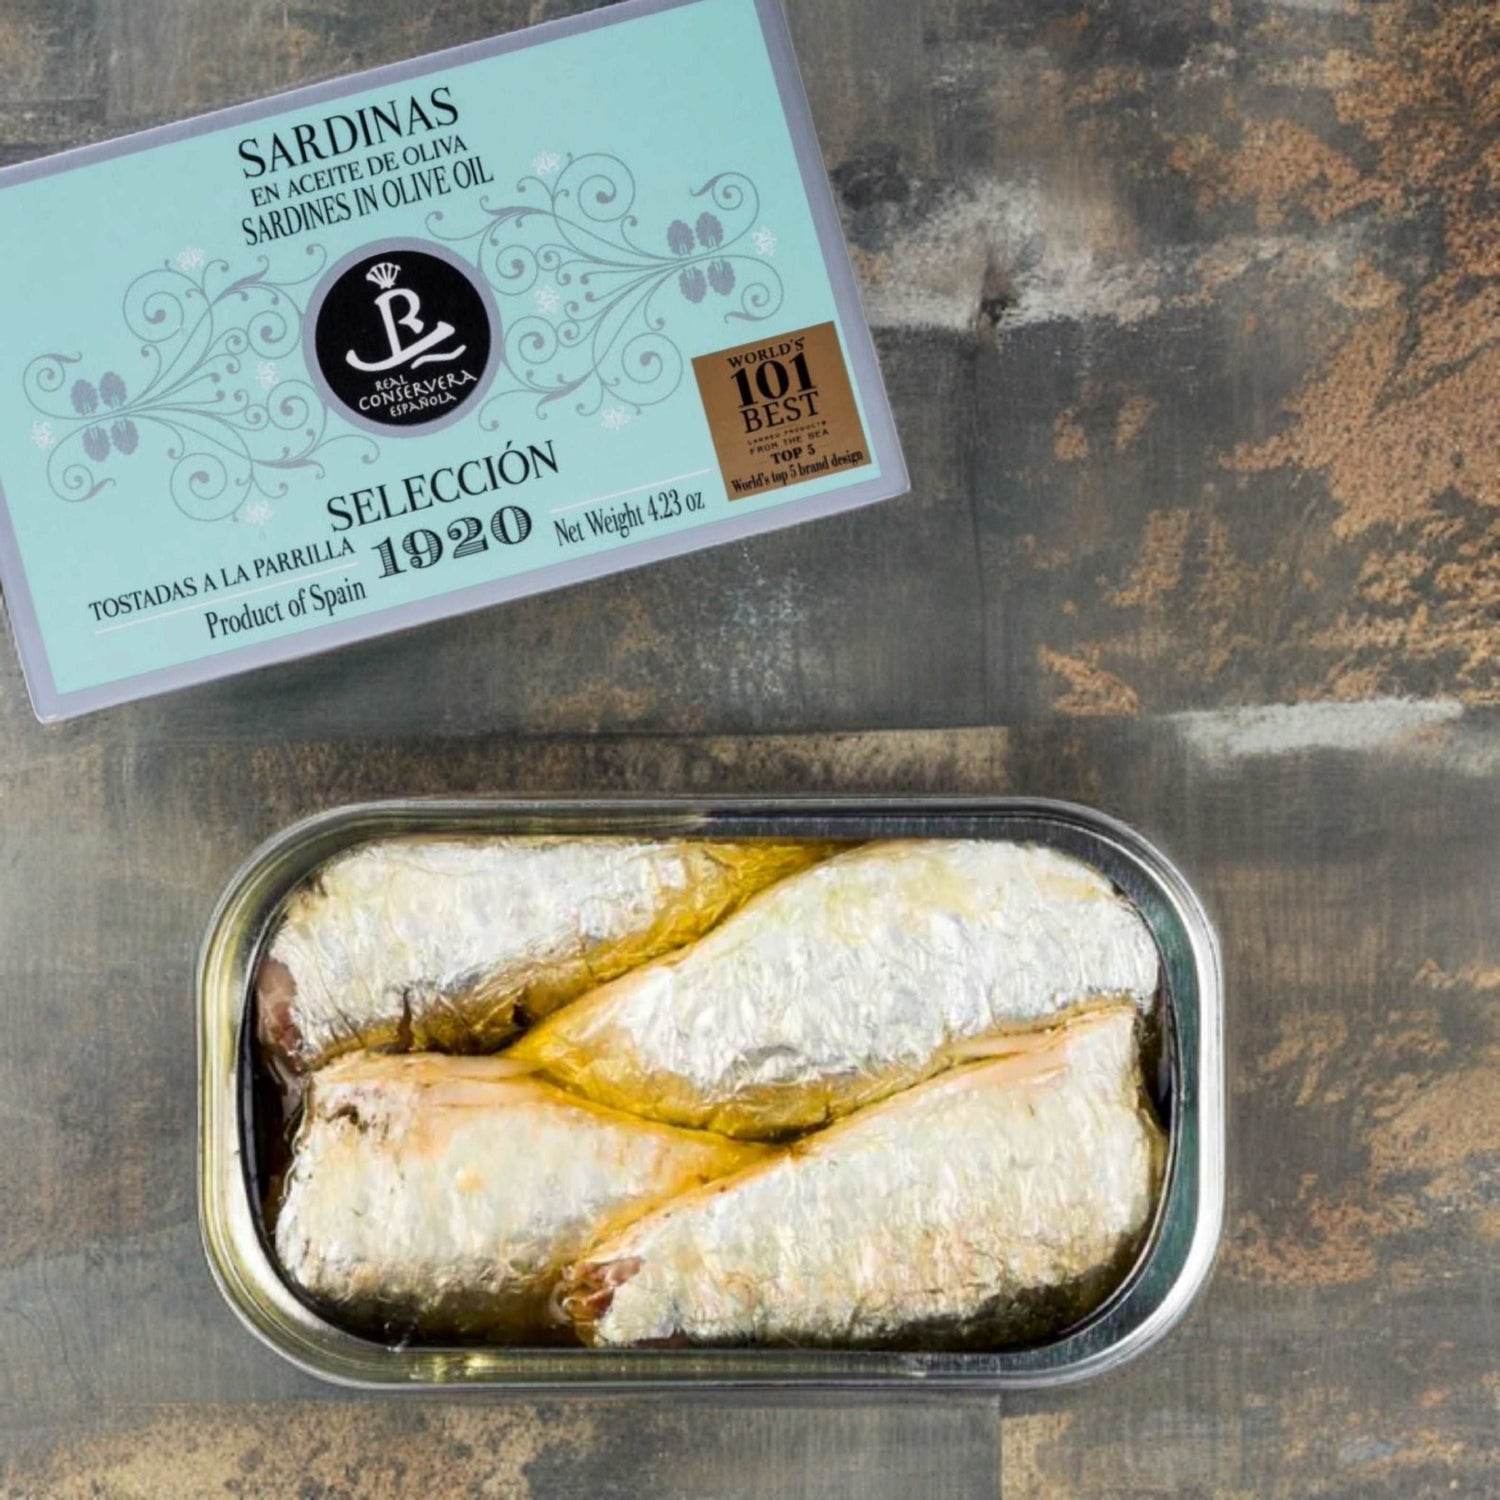 Sardines in Olive Oil by Real Conservera Española